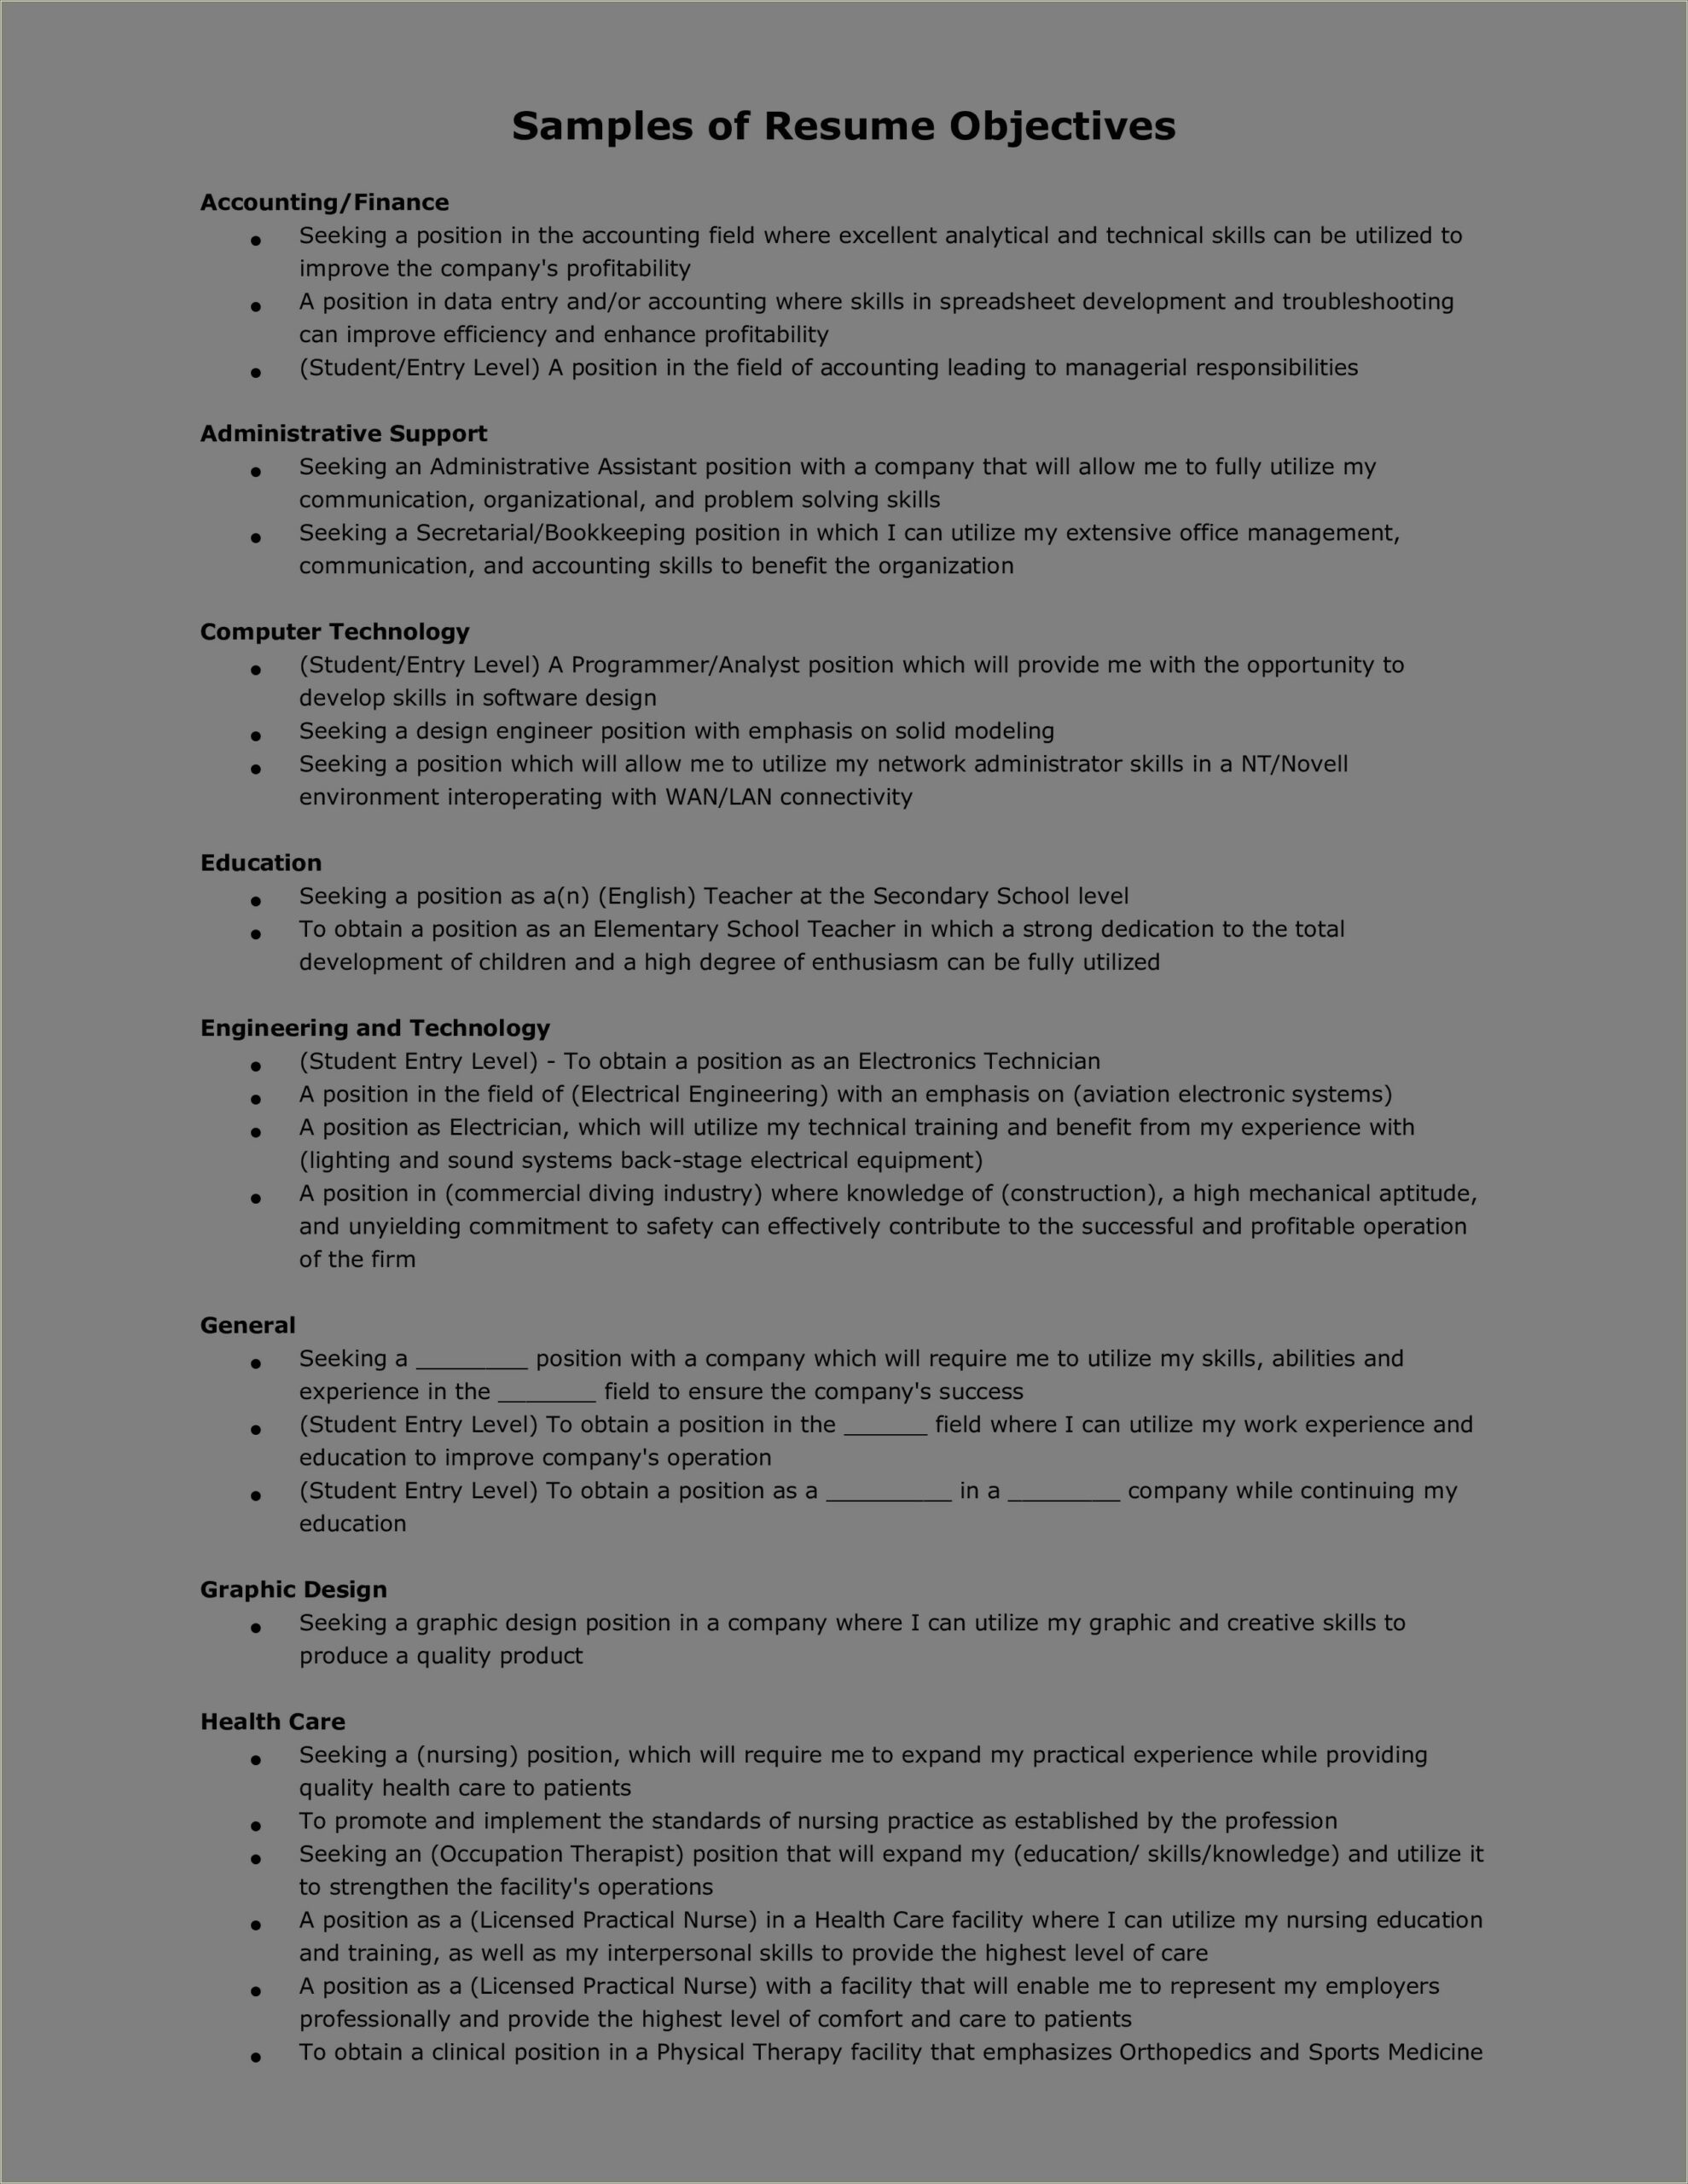 Example Of An Entry Level Networking Specialist Resume